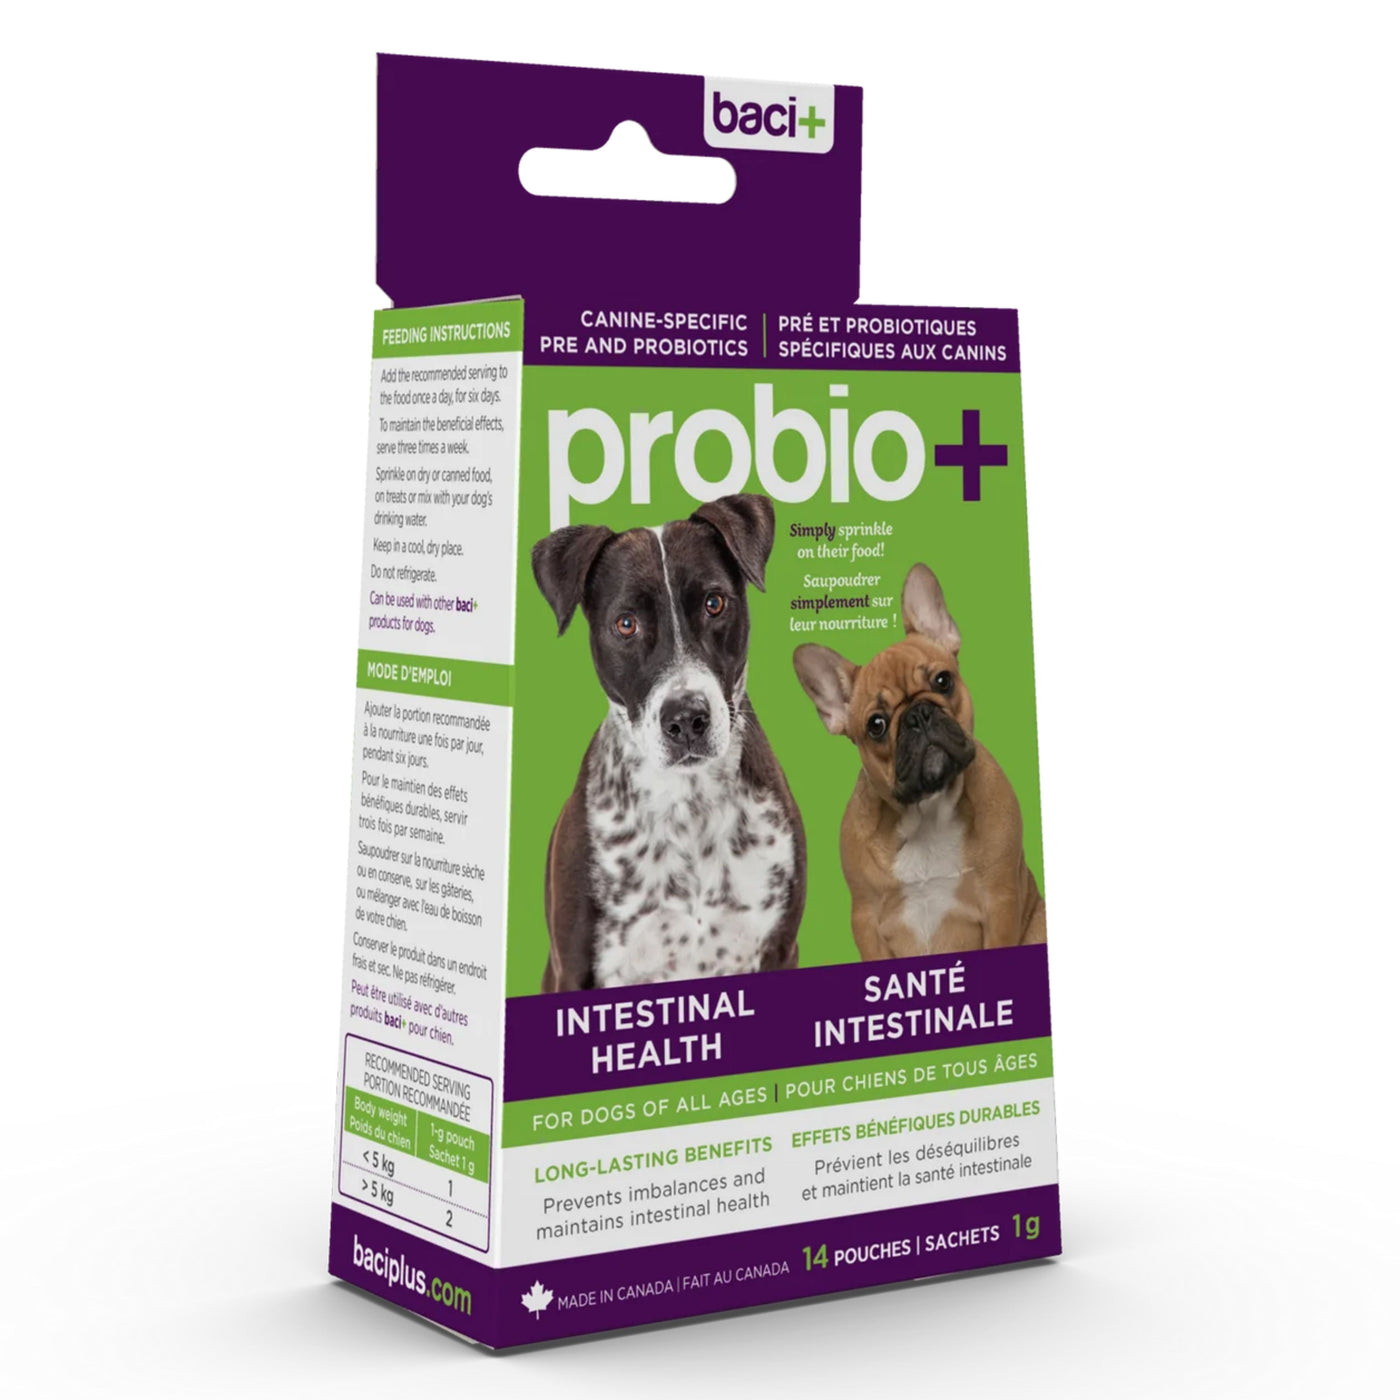 Baci+ Probio+ Pre and Probiotic for Dogs